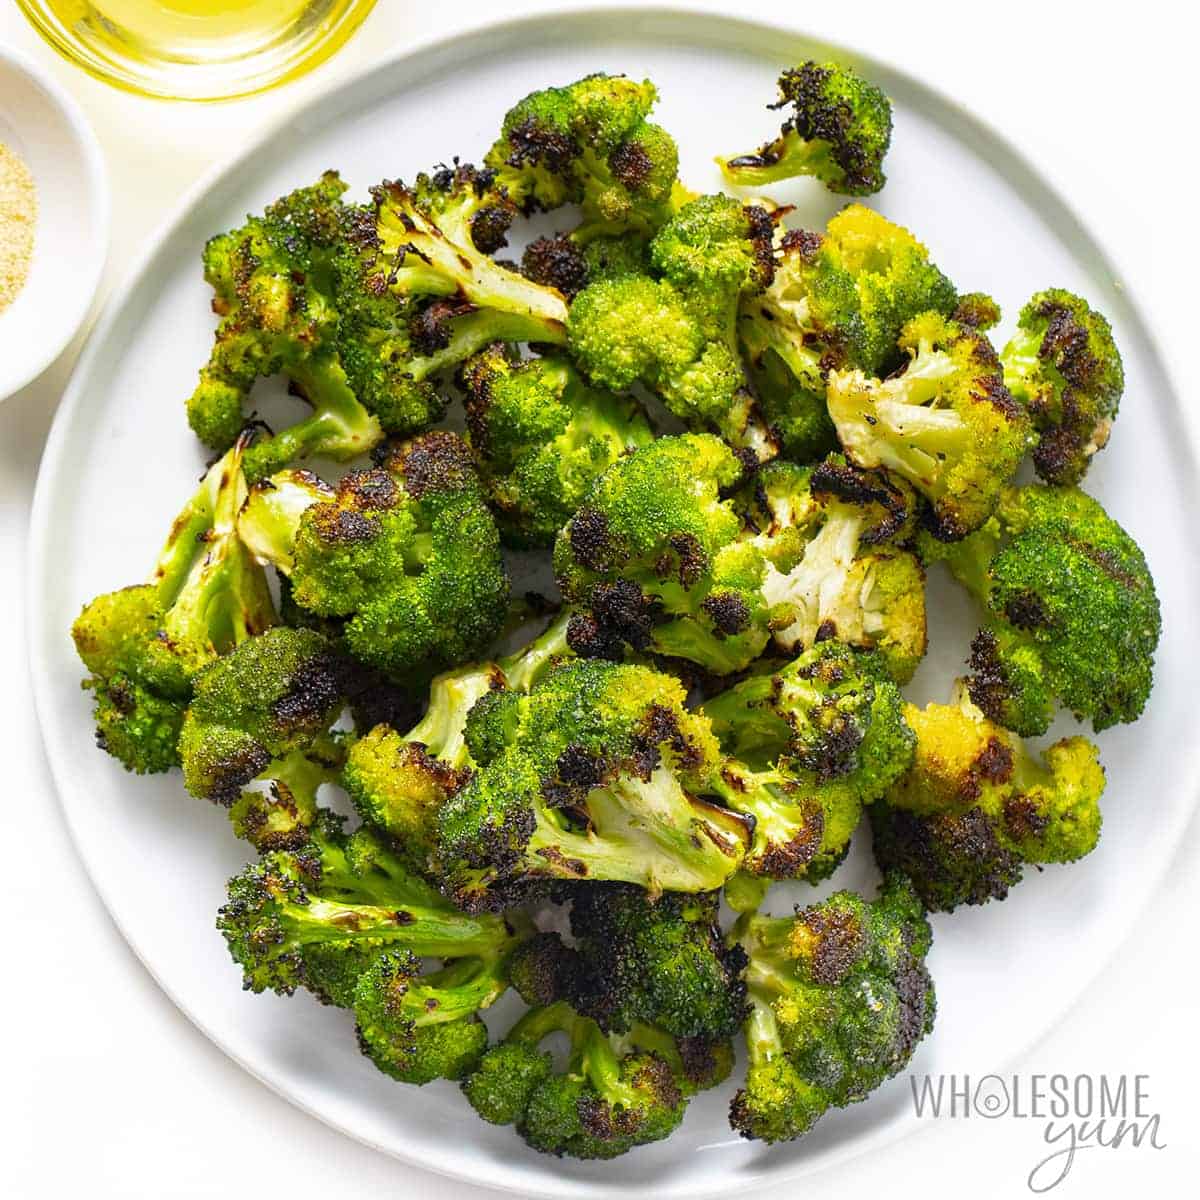 Image of grilled broccoli on a plate
